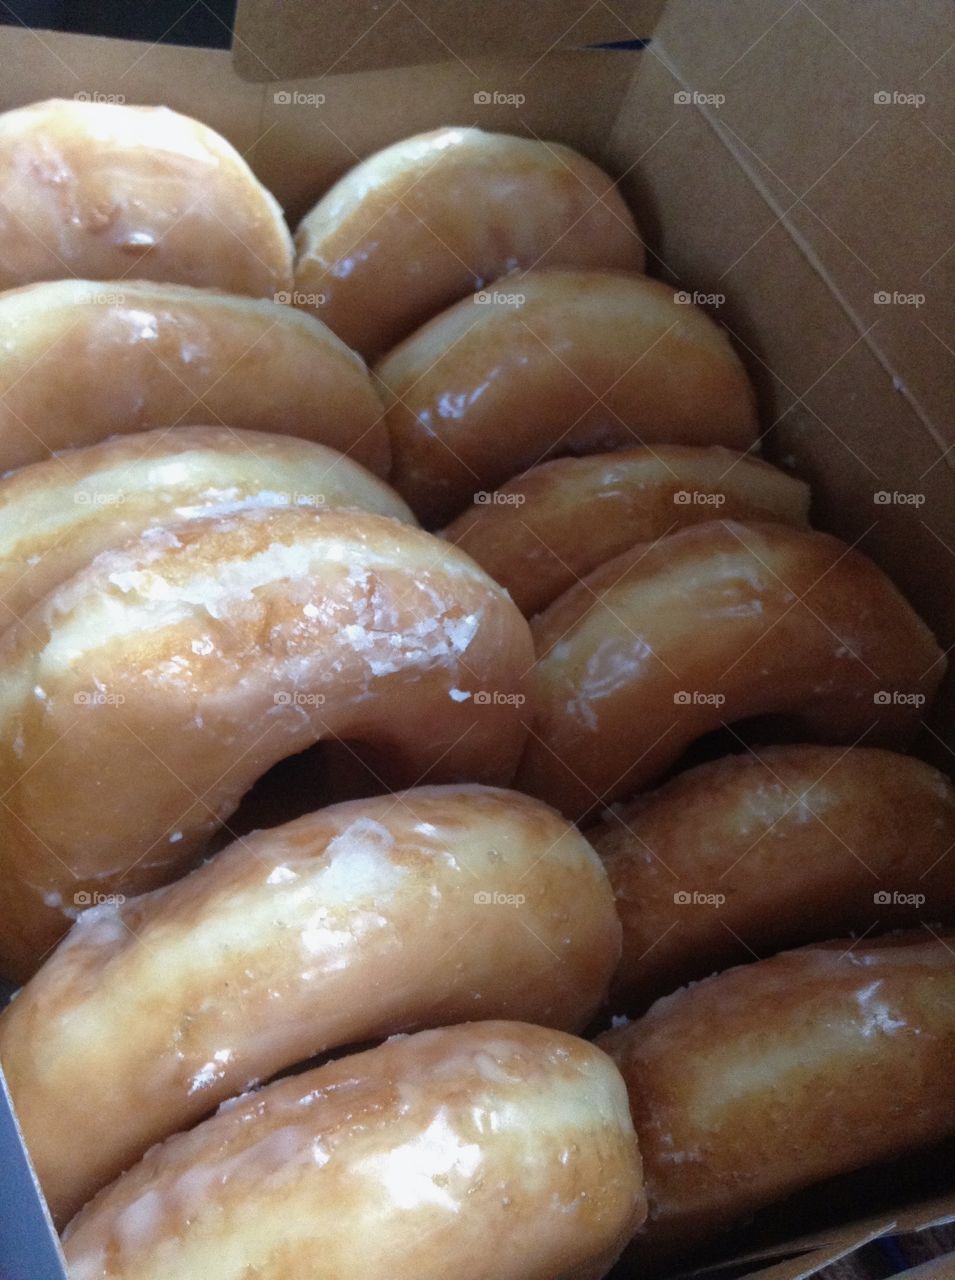 Box of a dozen doughnuts from a bakery in Indiana